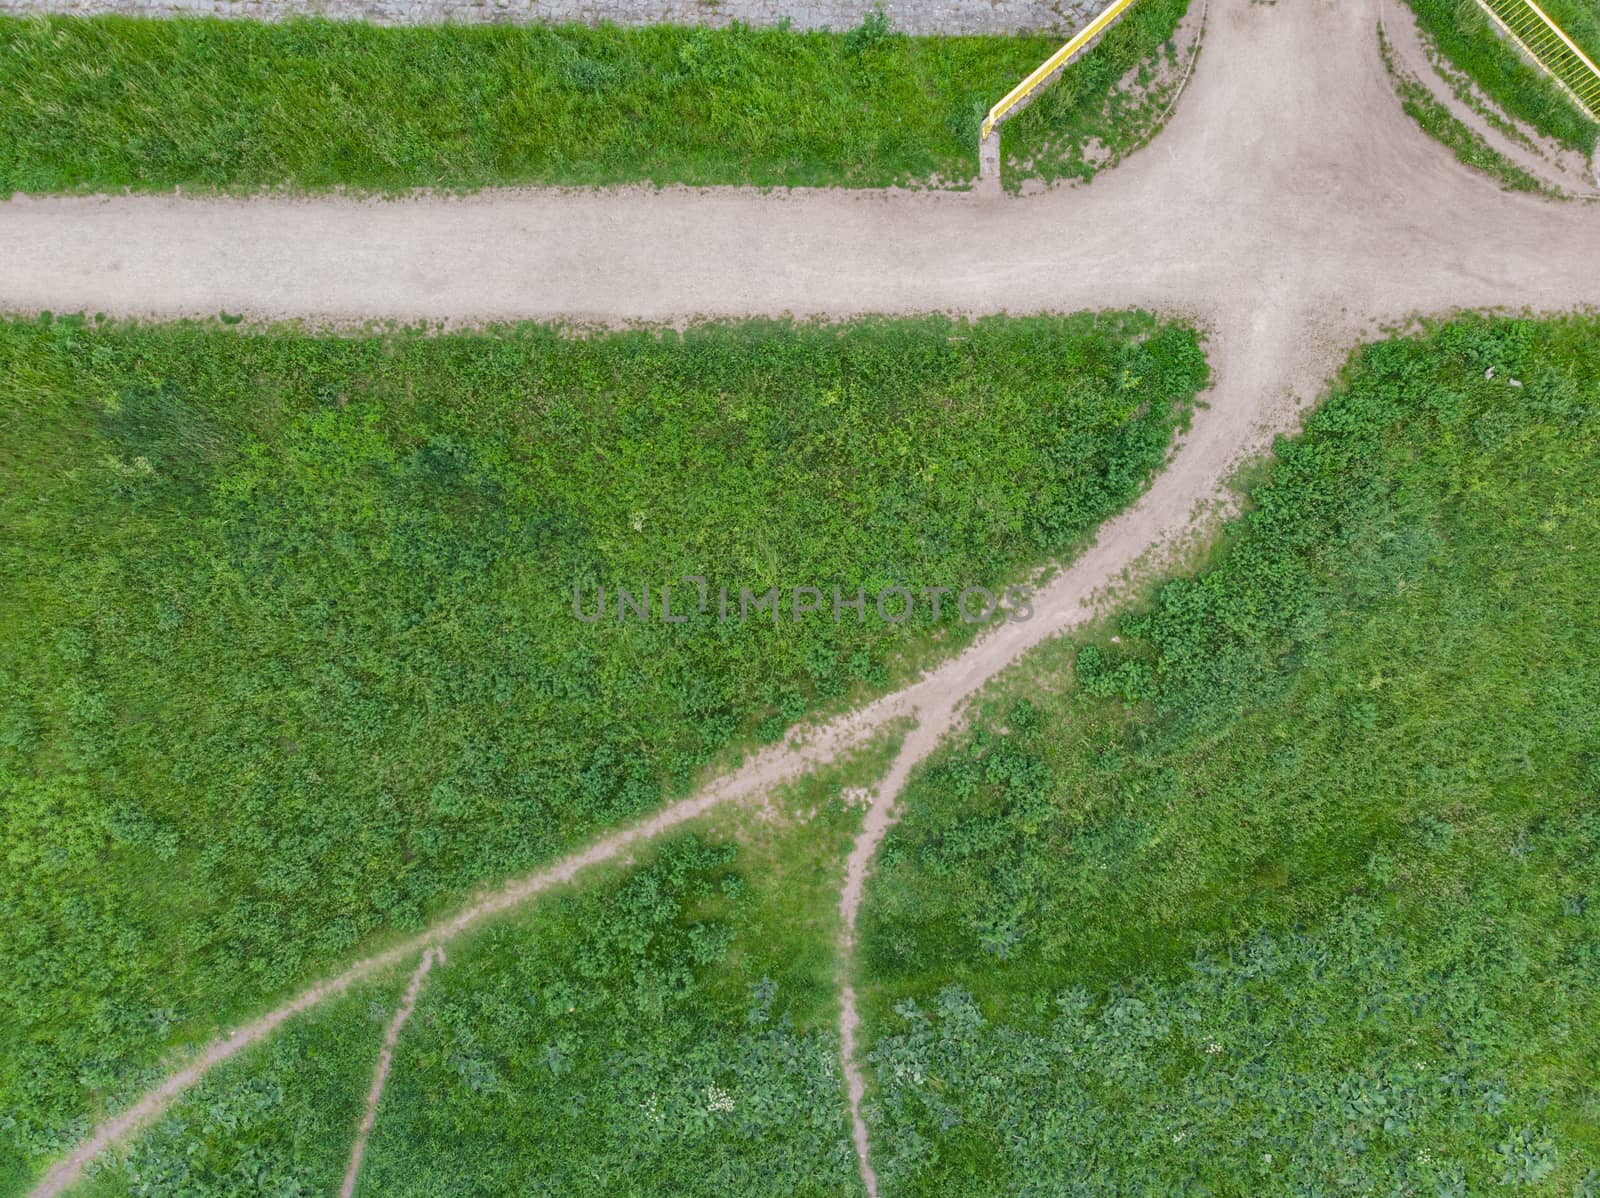 Top down look to connection of paths between grass and bushes by Wierzchu